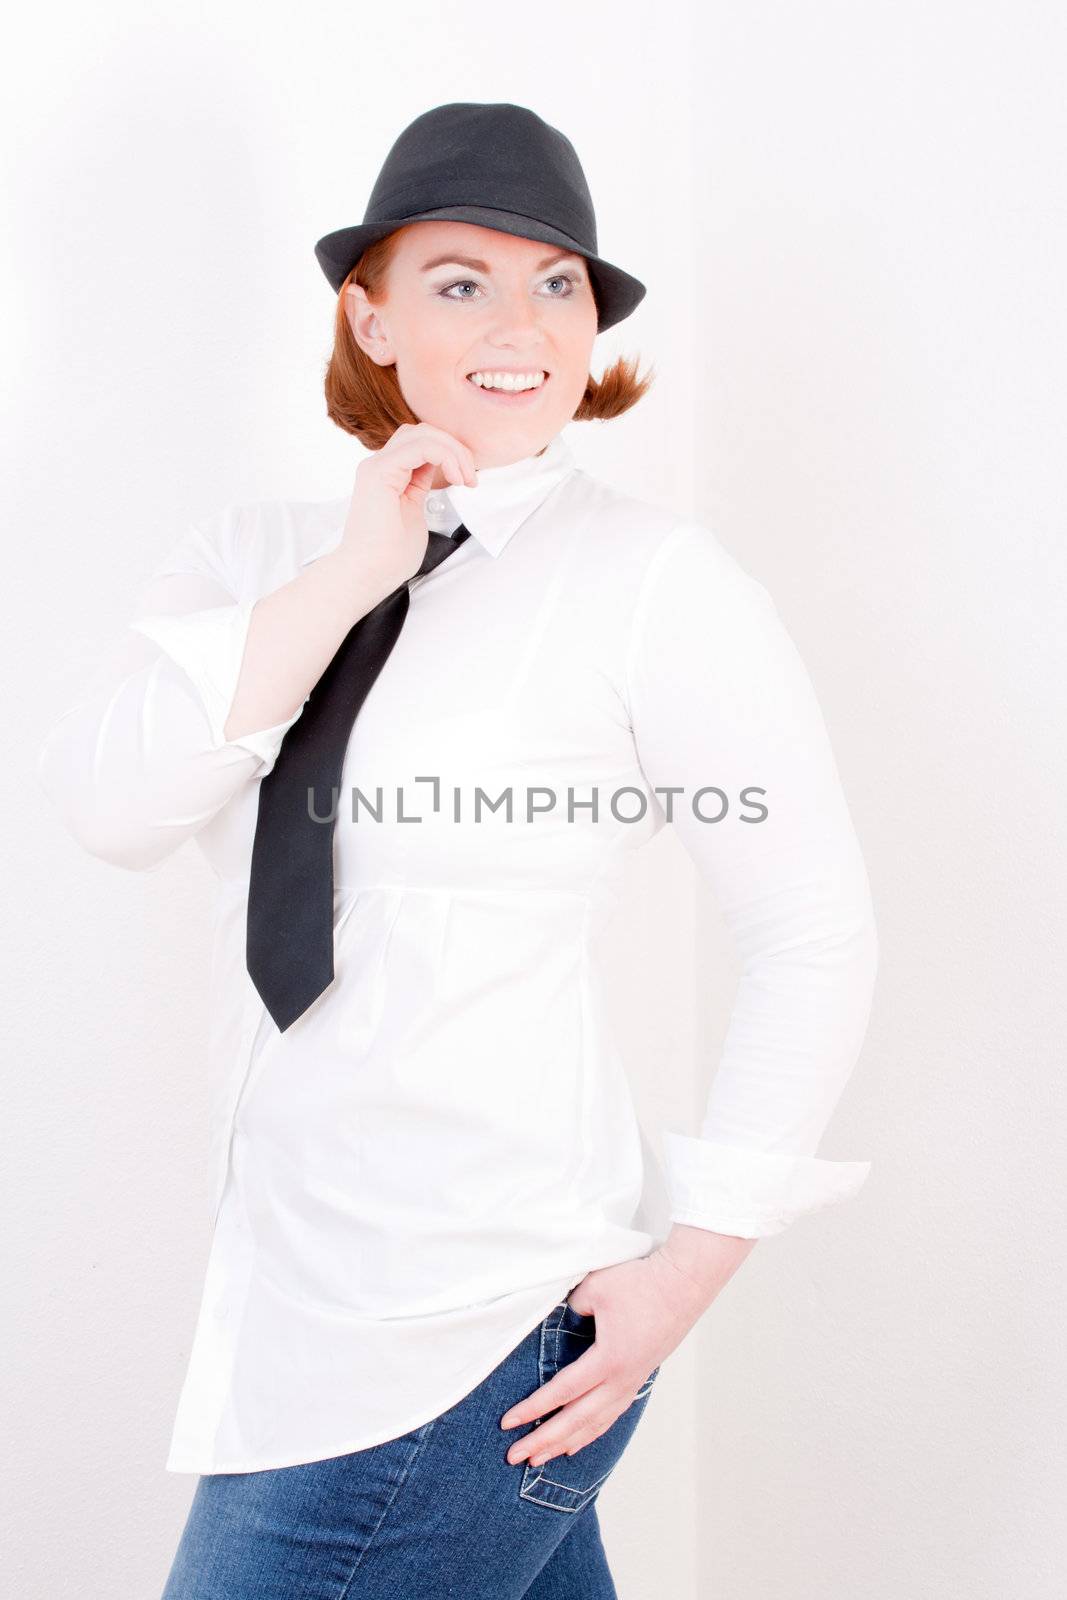 Fashionable woman wearing a tie by STphotography